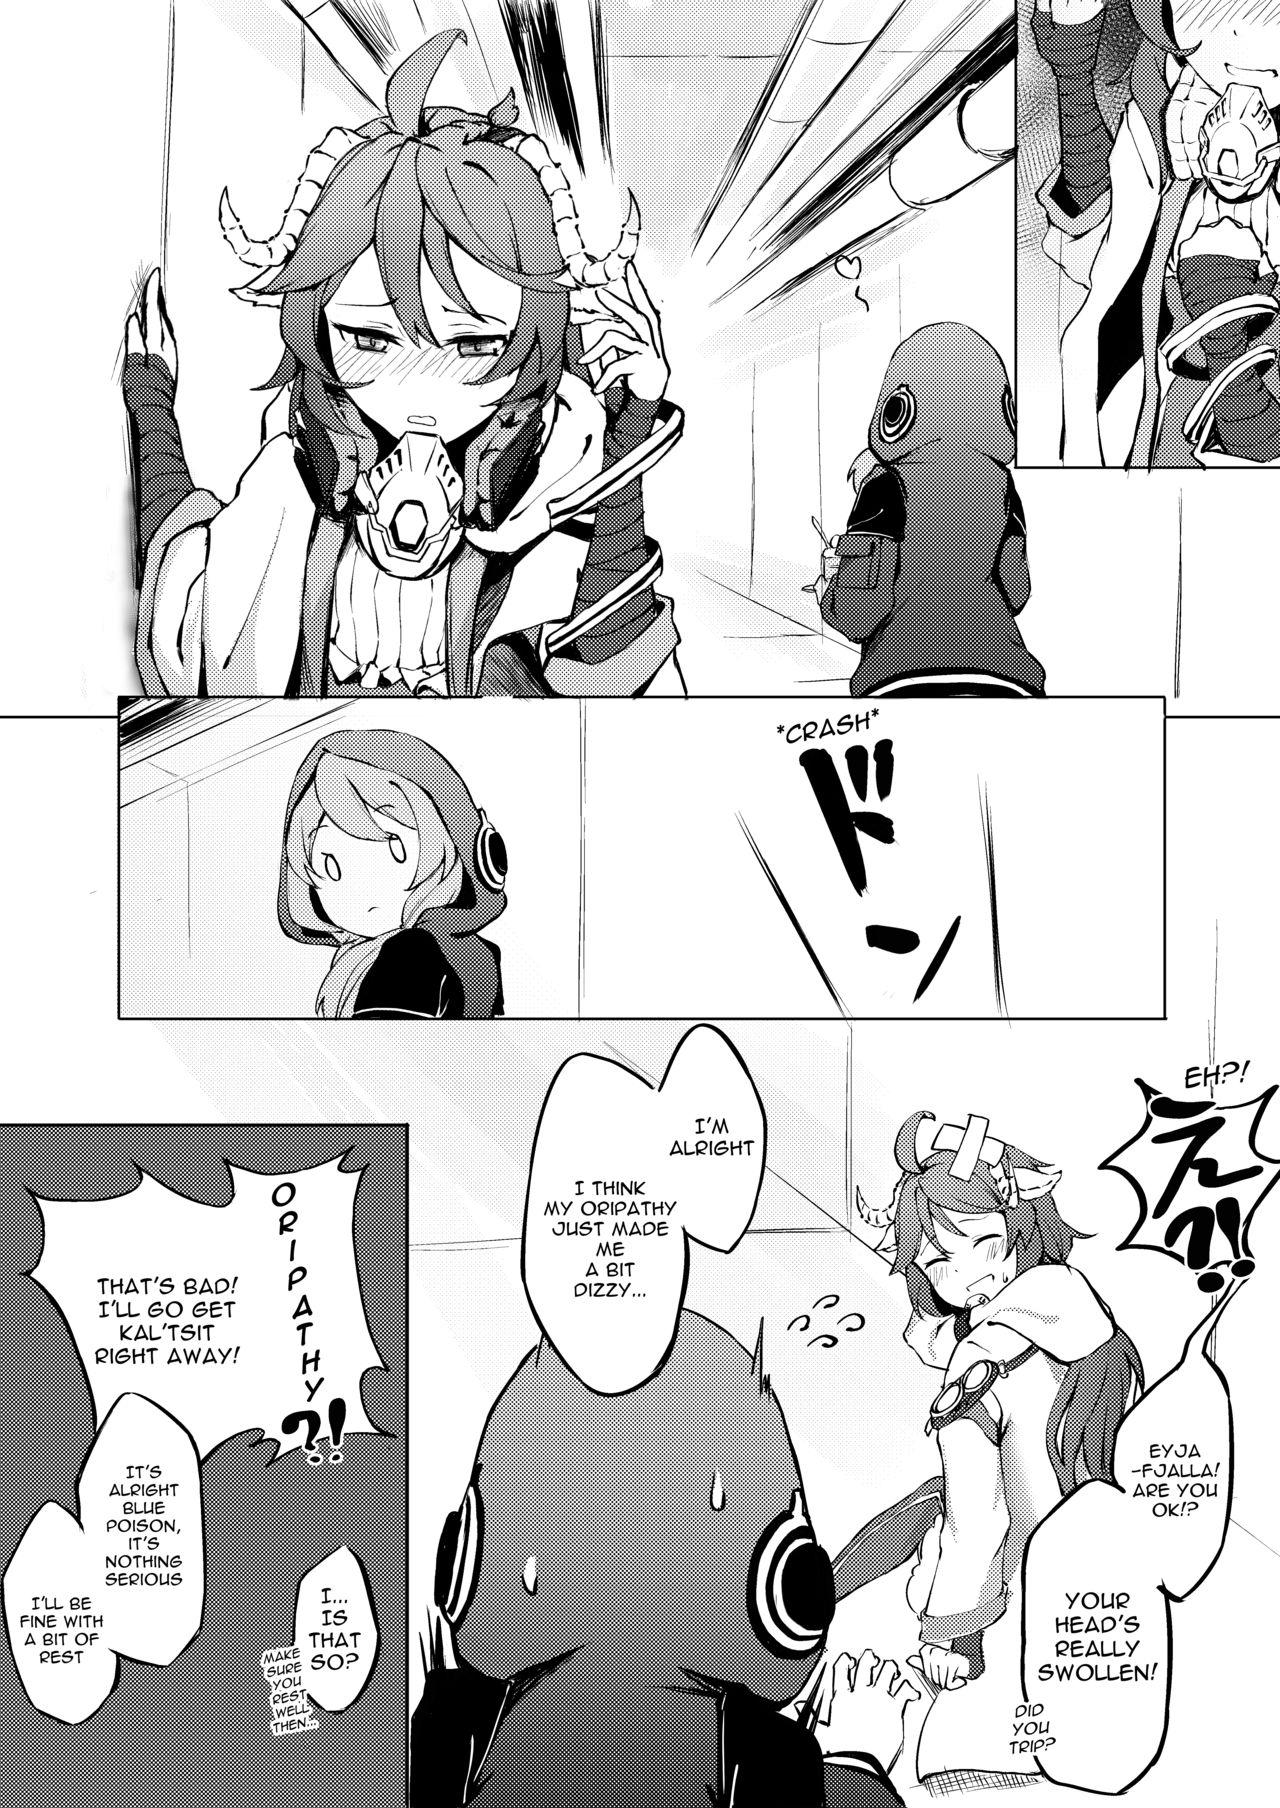 Loira Phantom Voices - Arknights Blackmail - Page 7